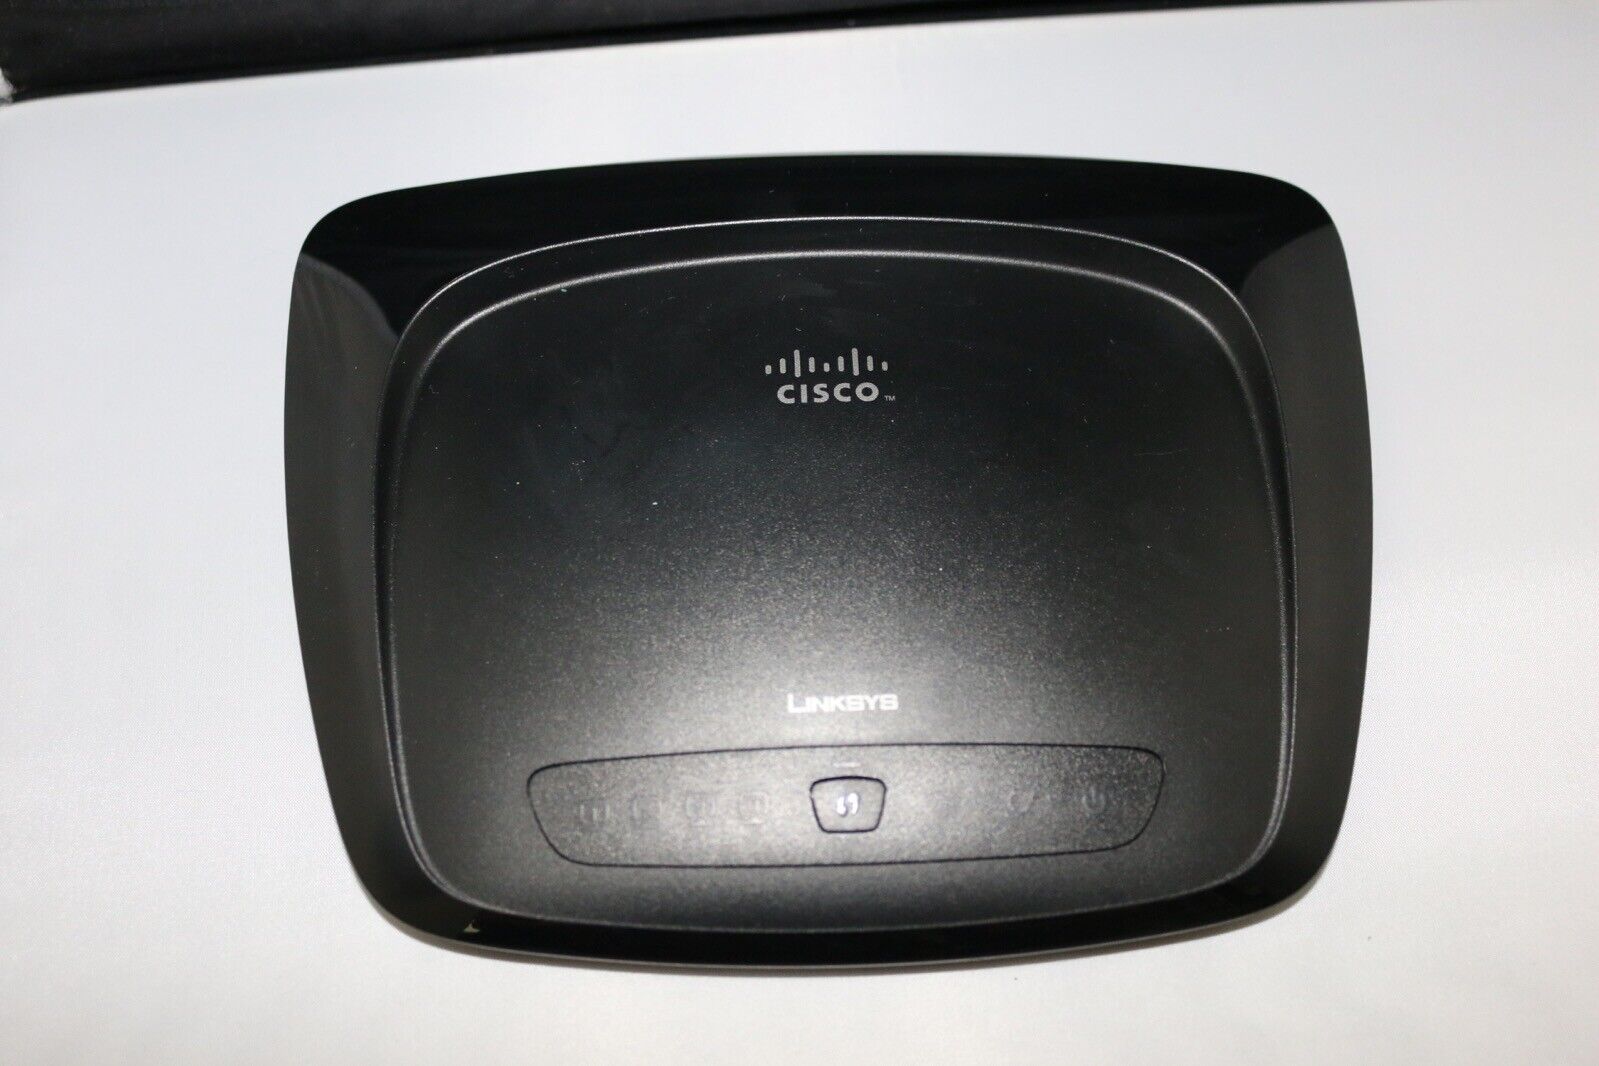 Cisco Router Linksys Used